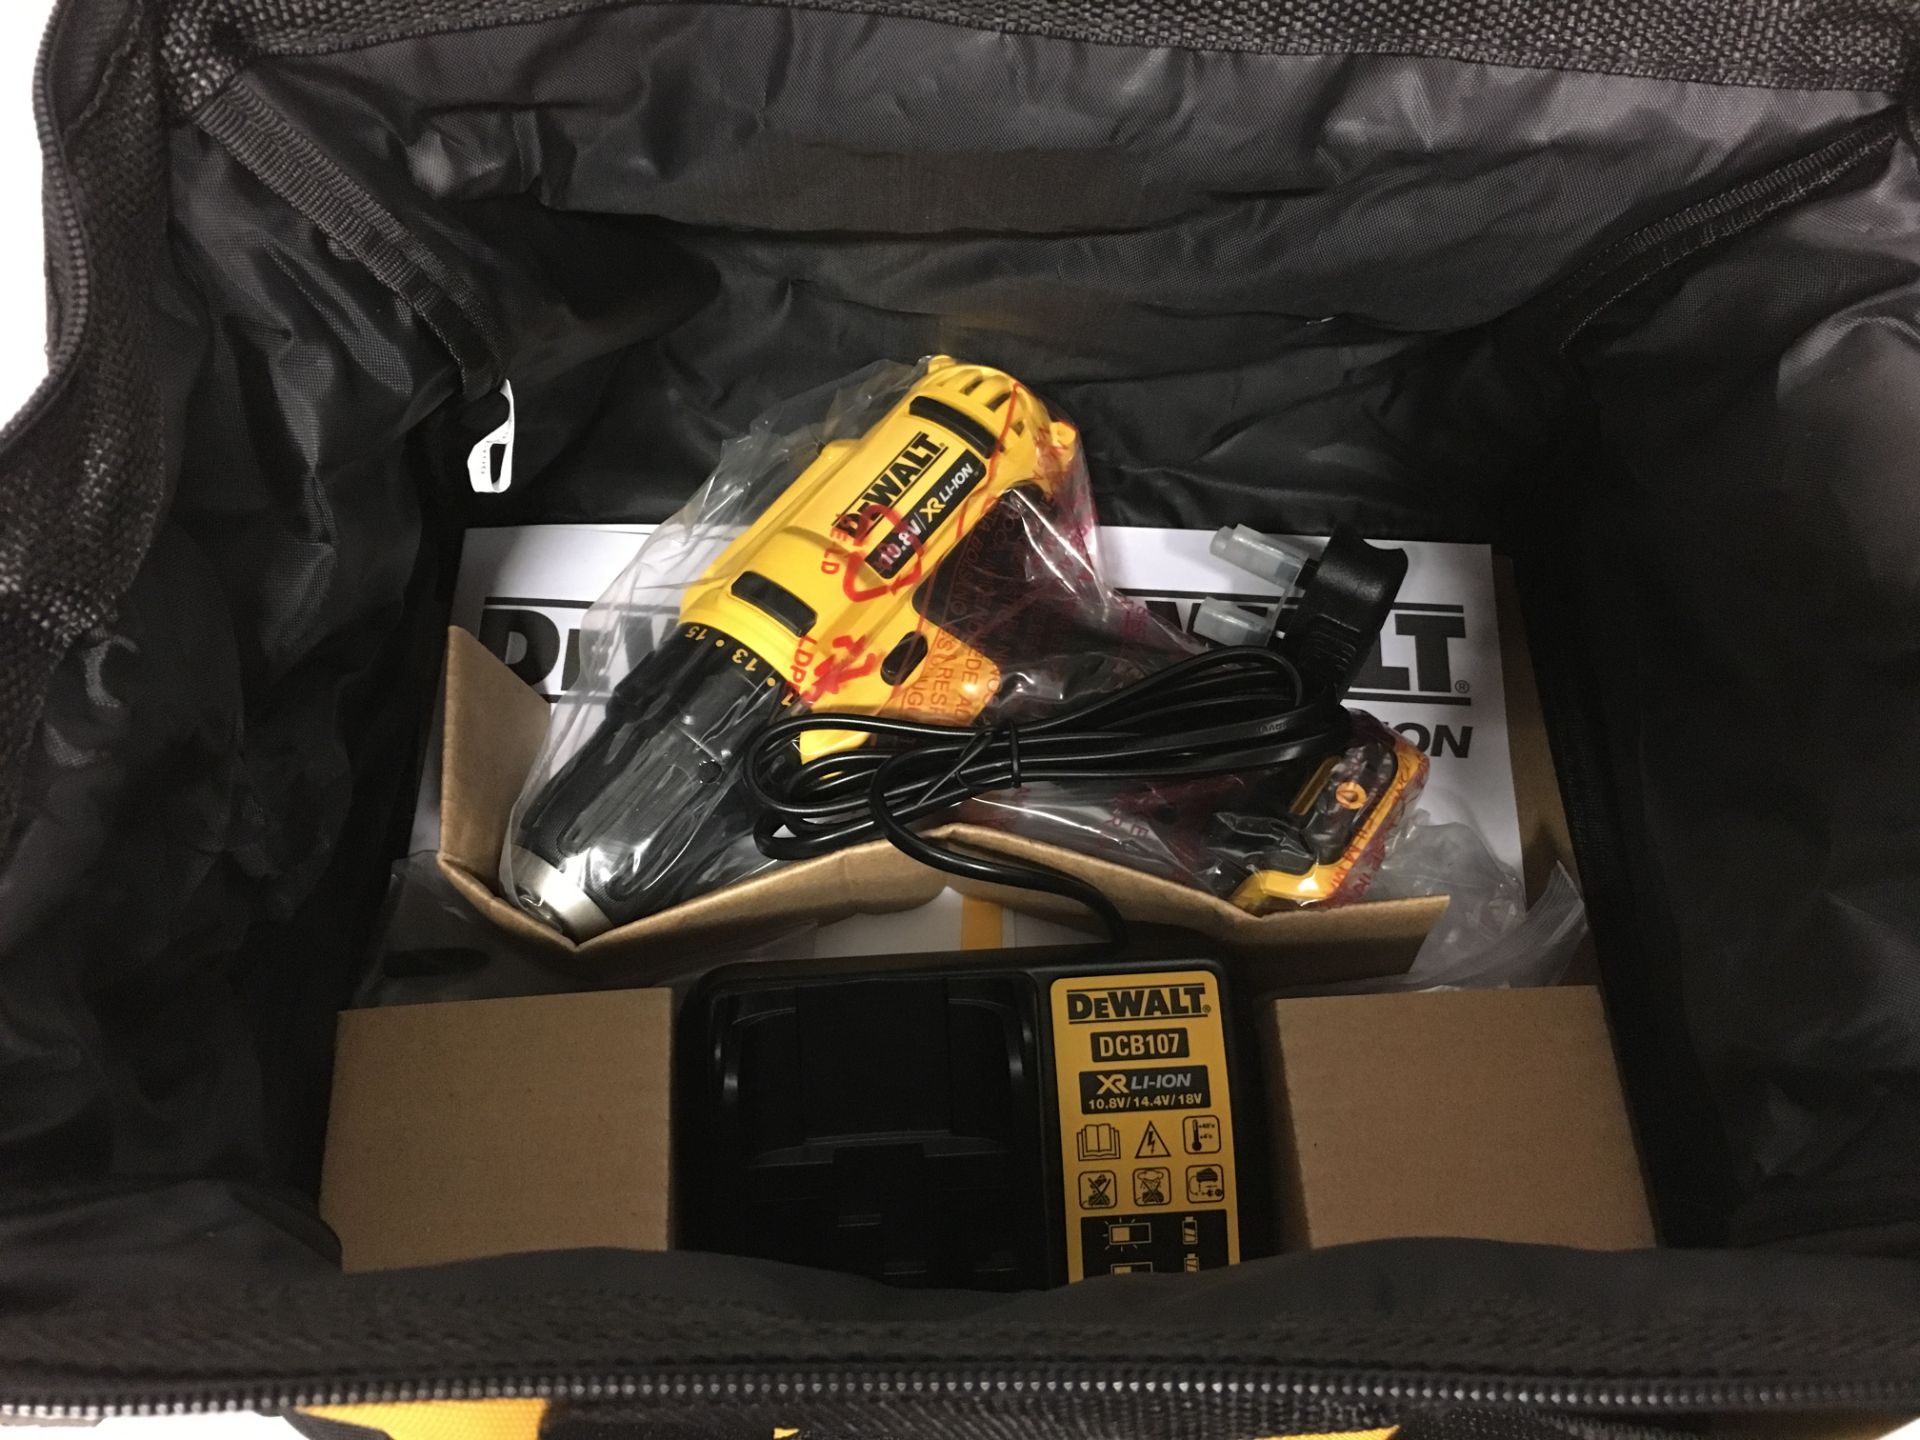 1 x DeWalt DCK211C2 10.8 Volt Compact Drill Driver and Impact Driver Twin Pack in Kitbag | EAN: 5035 - Image 5 of 5